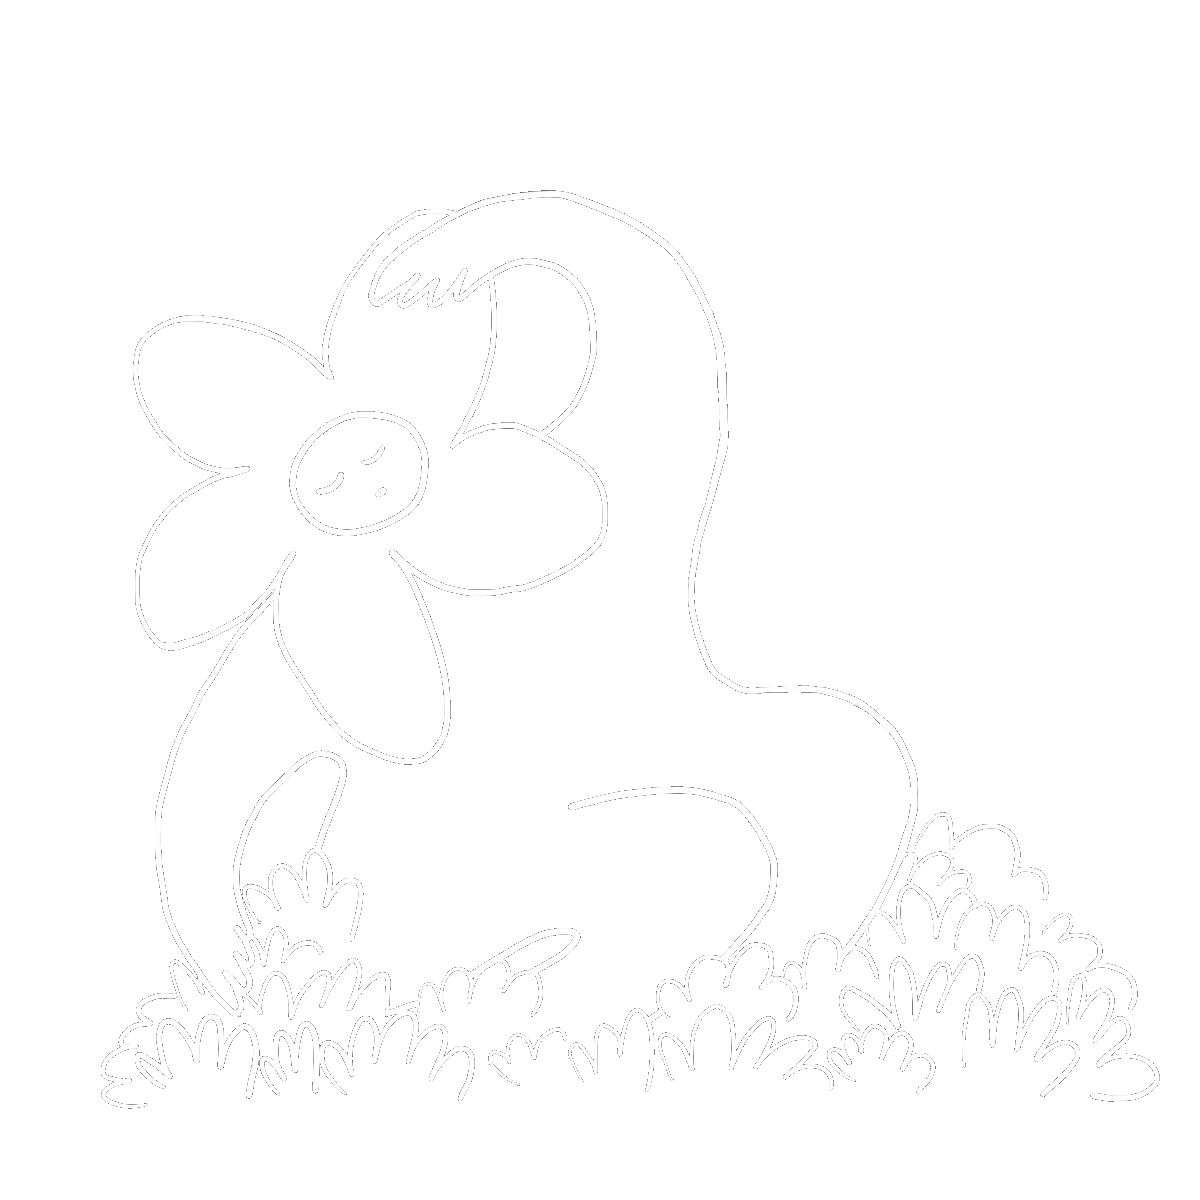 Simple, animated line illustration of a flower person relaxing